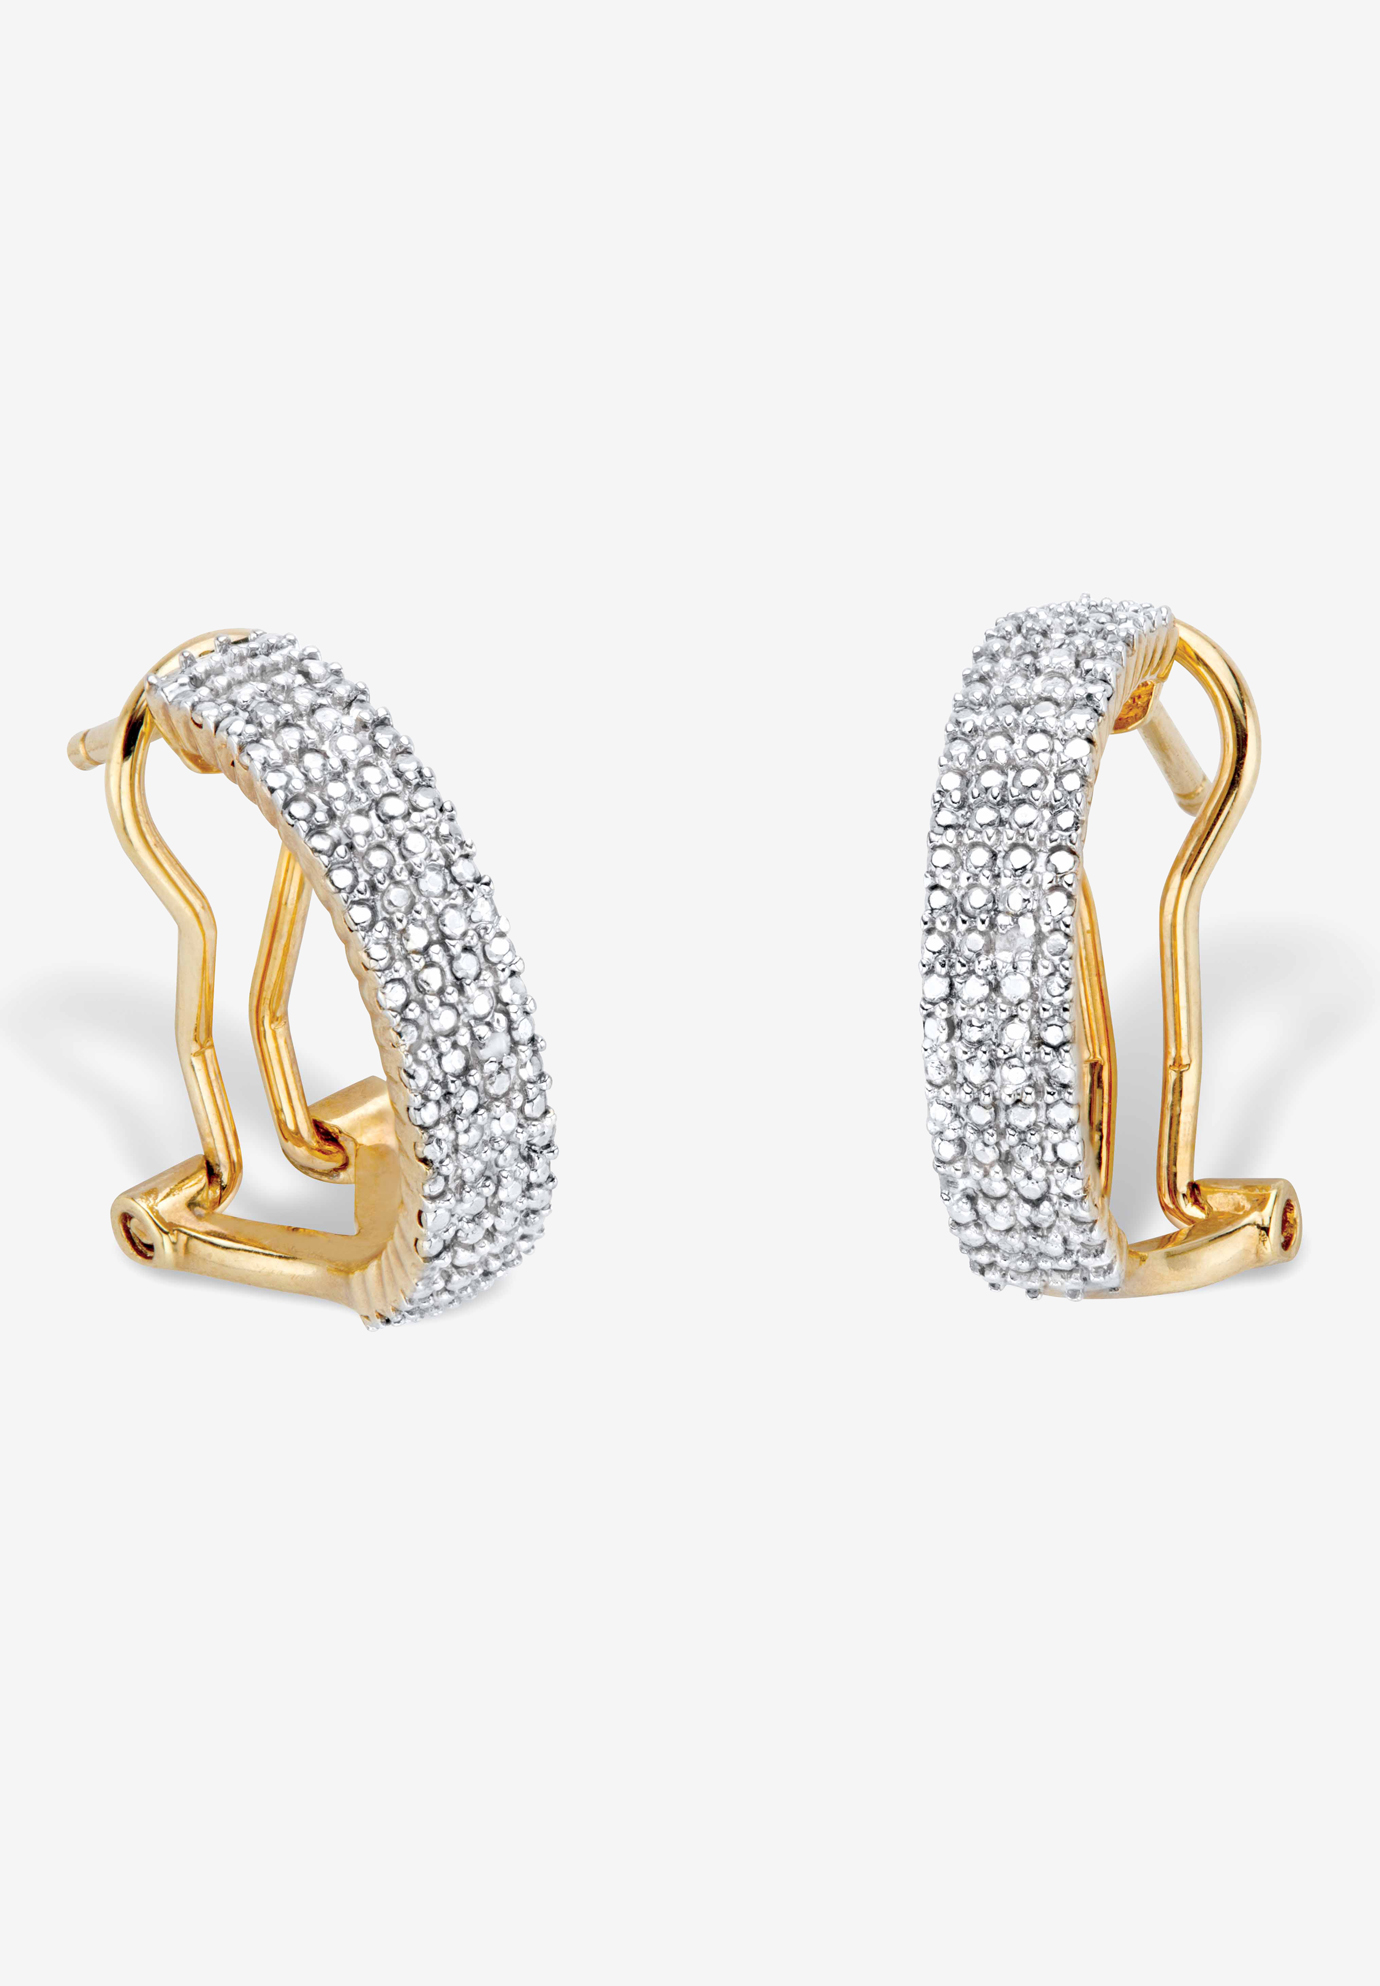 Yellow Gold-Plated Demi Hoop Earrings with Genuine Diamond Accents, DIAMOND